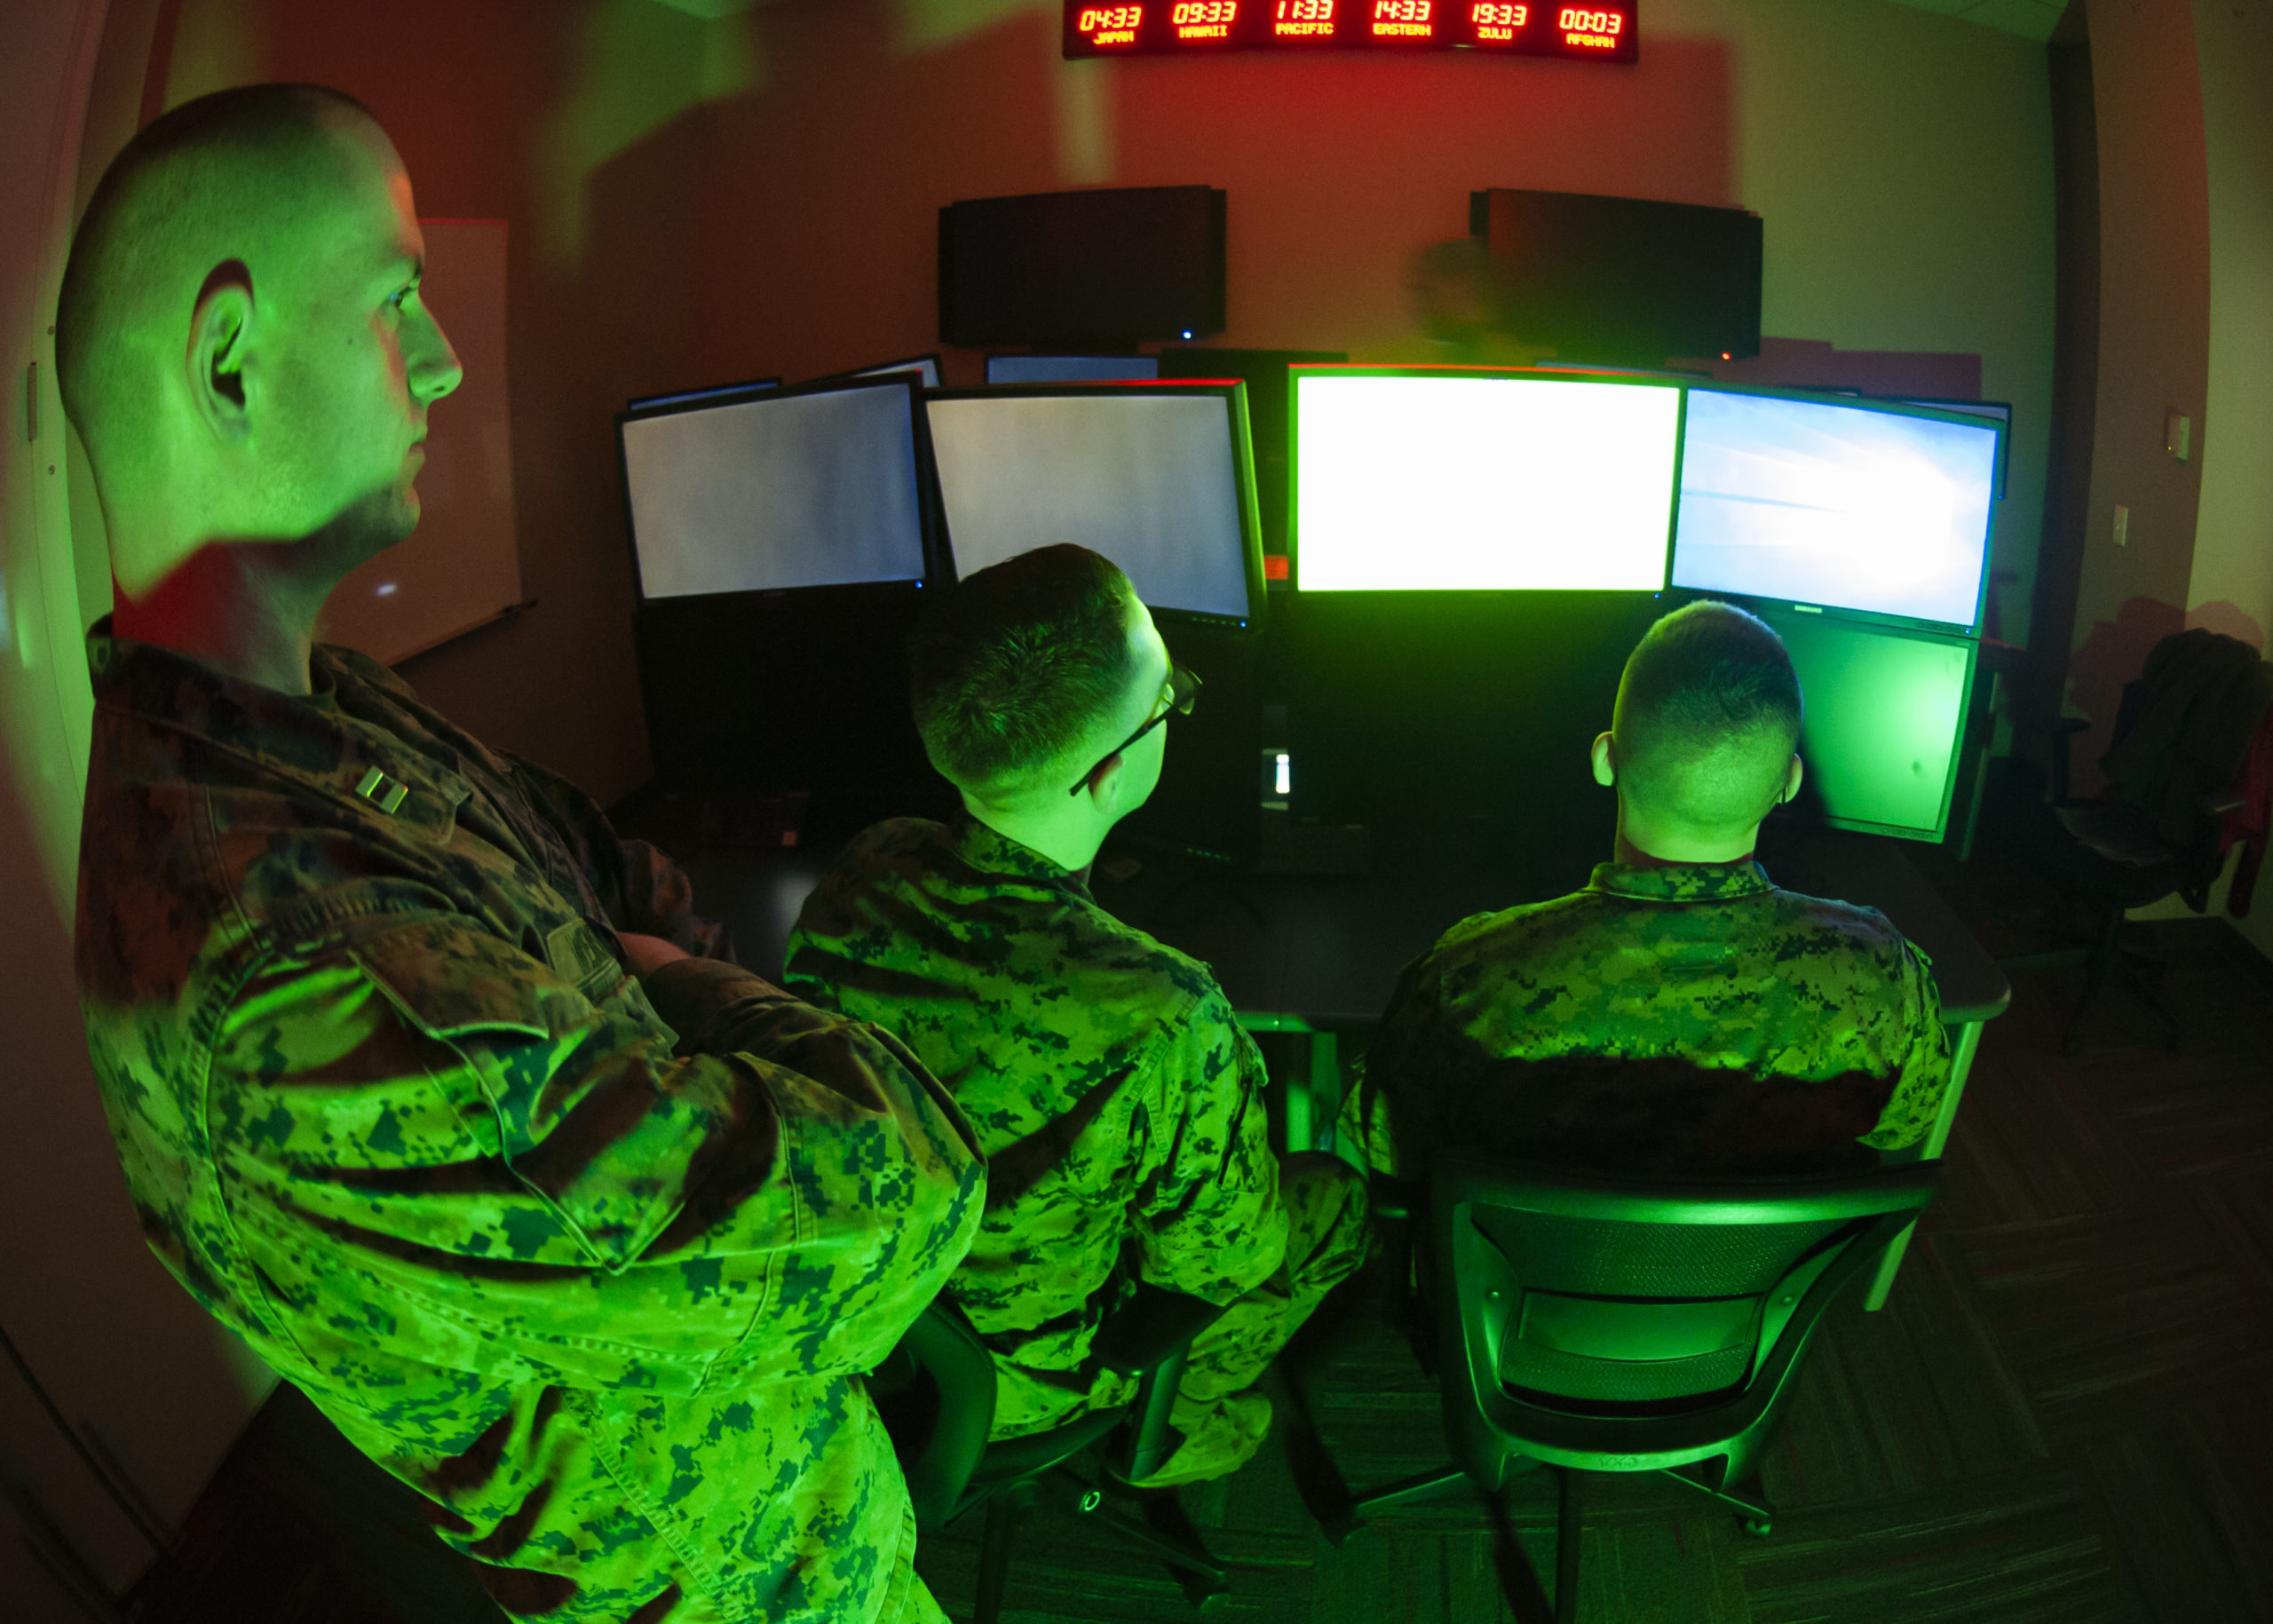 Serious Shortcomings in DOD’s Cyber Incident Reporting, GAO Says